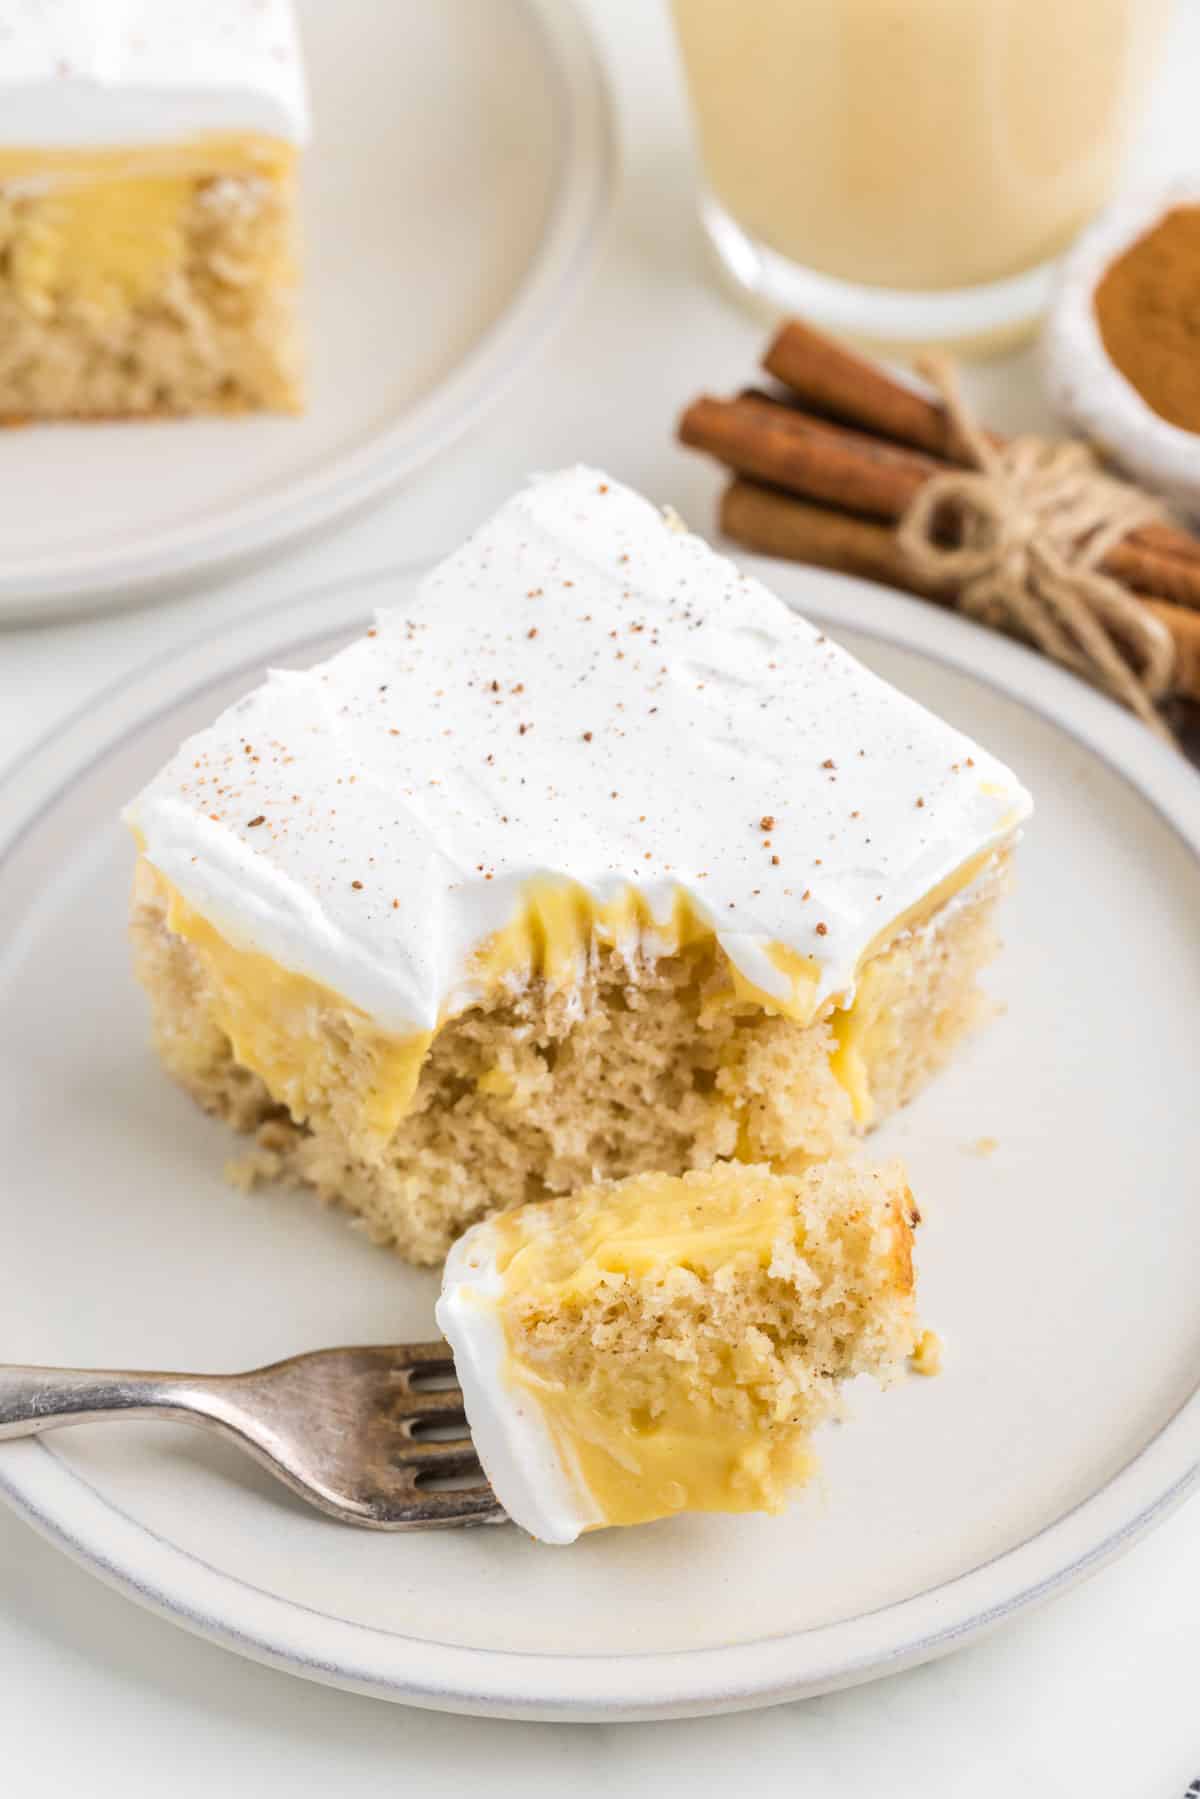 A fork with a bite of eggnog poke cake removed and sat on the plate.